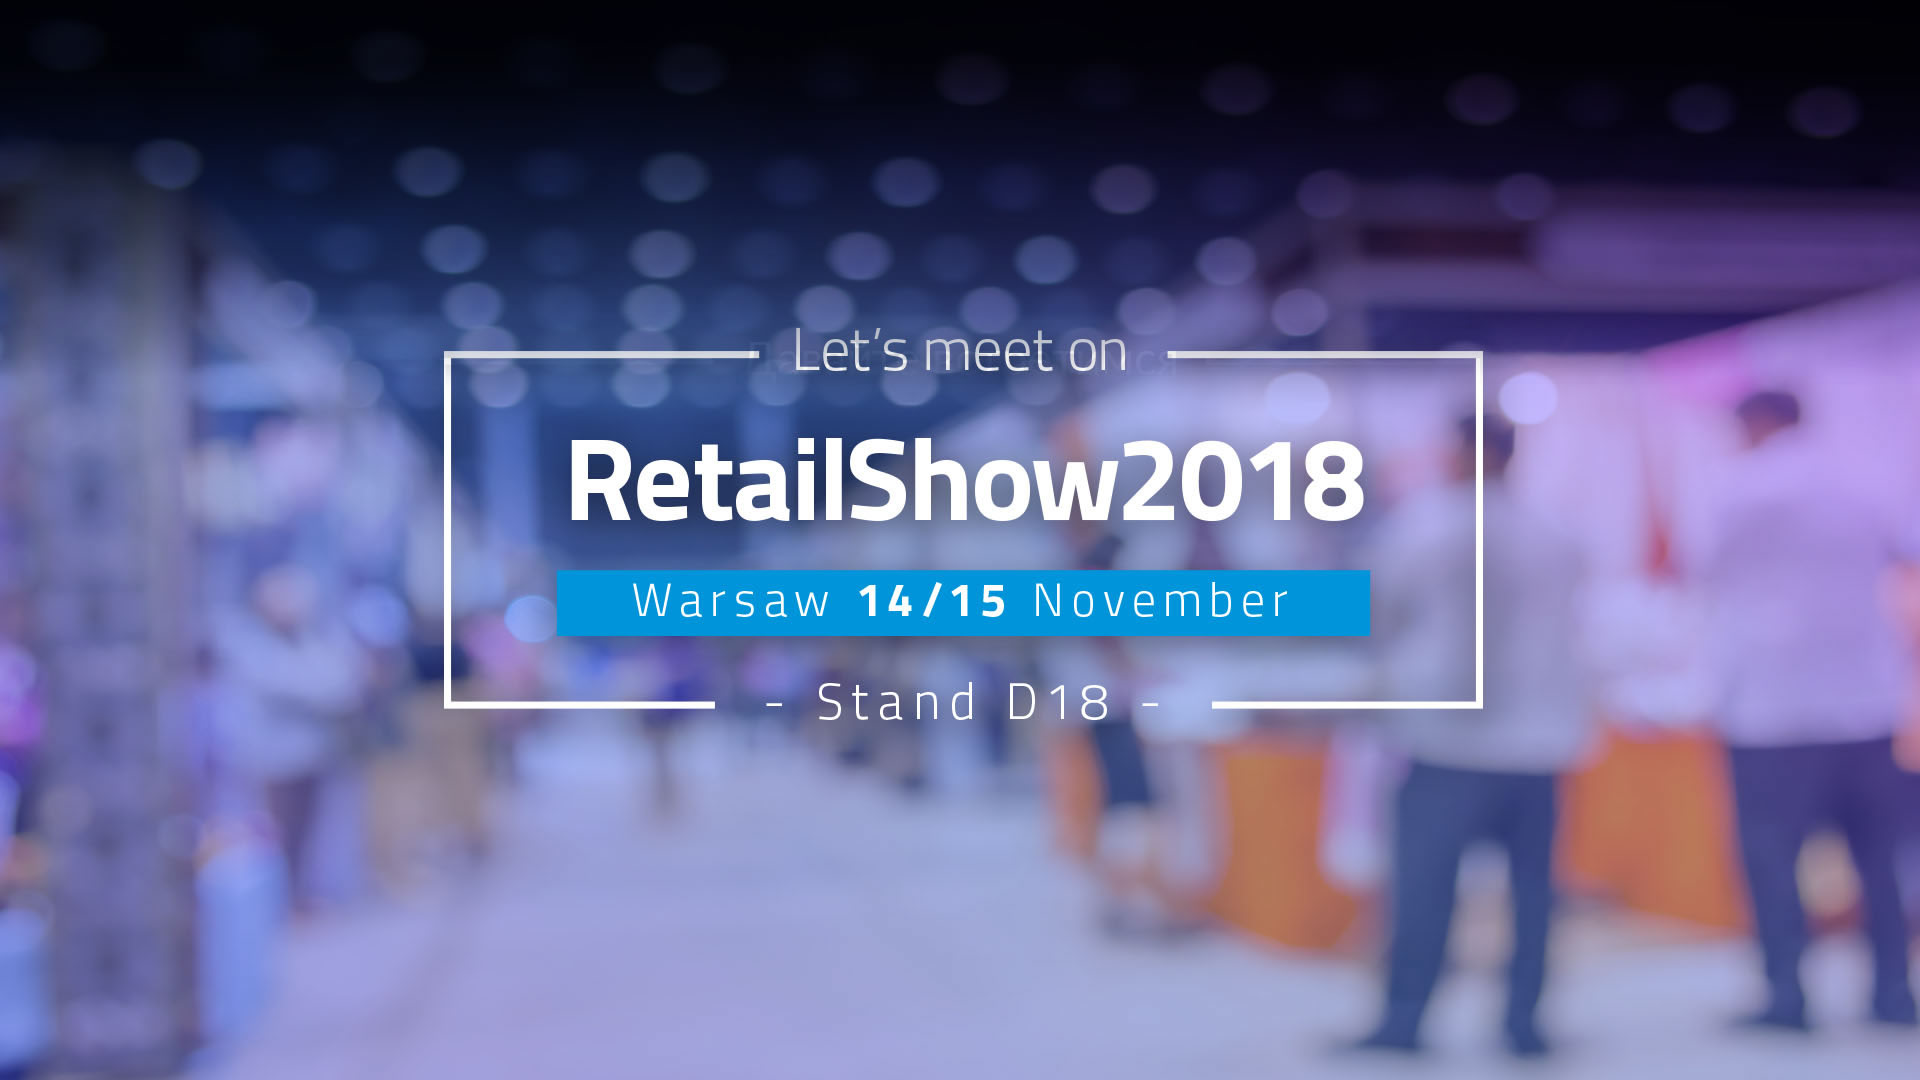 We invite you to the Retail Show 2018